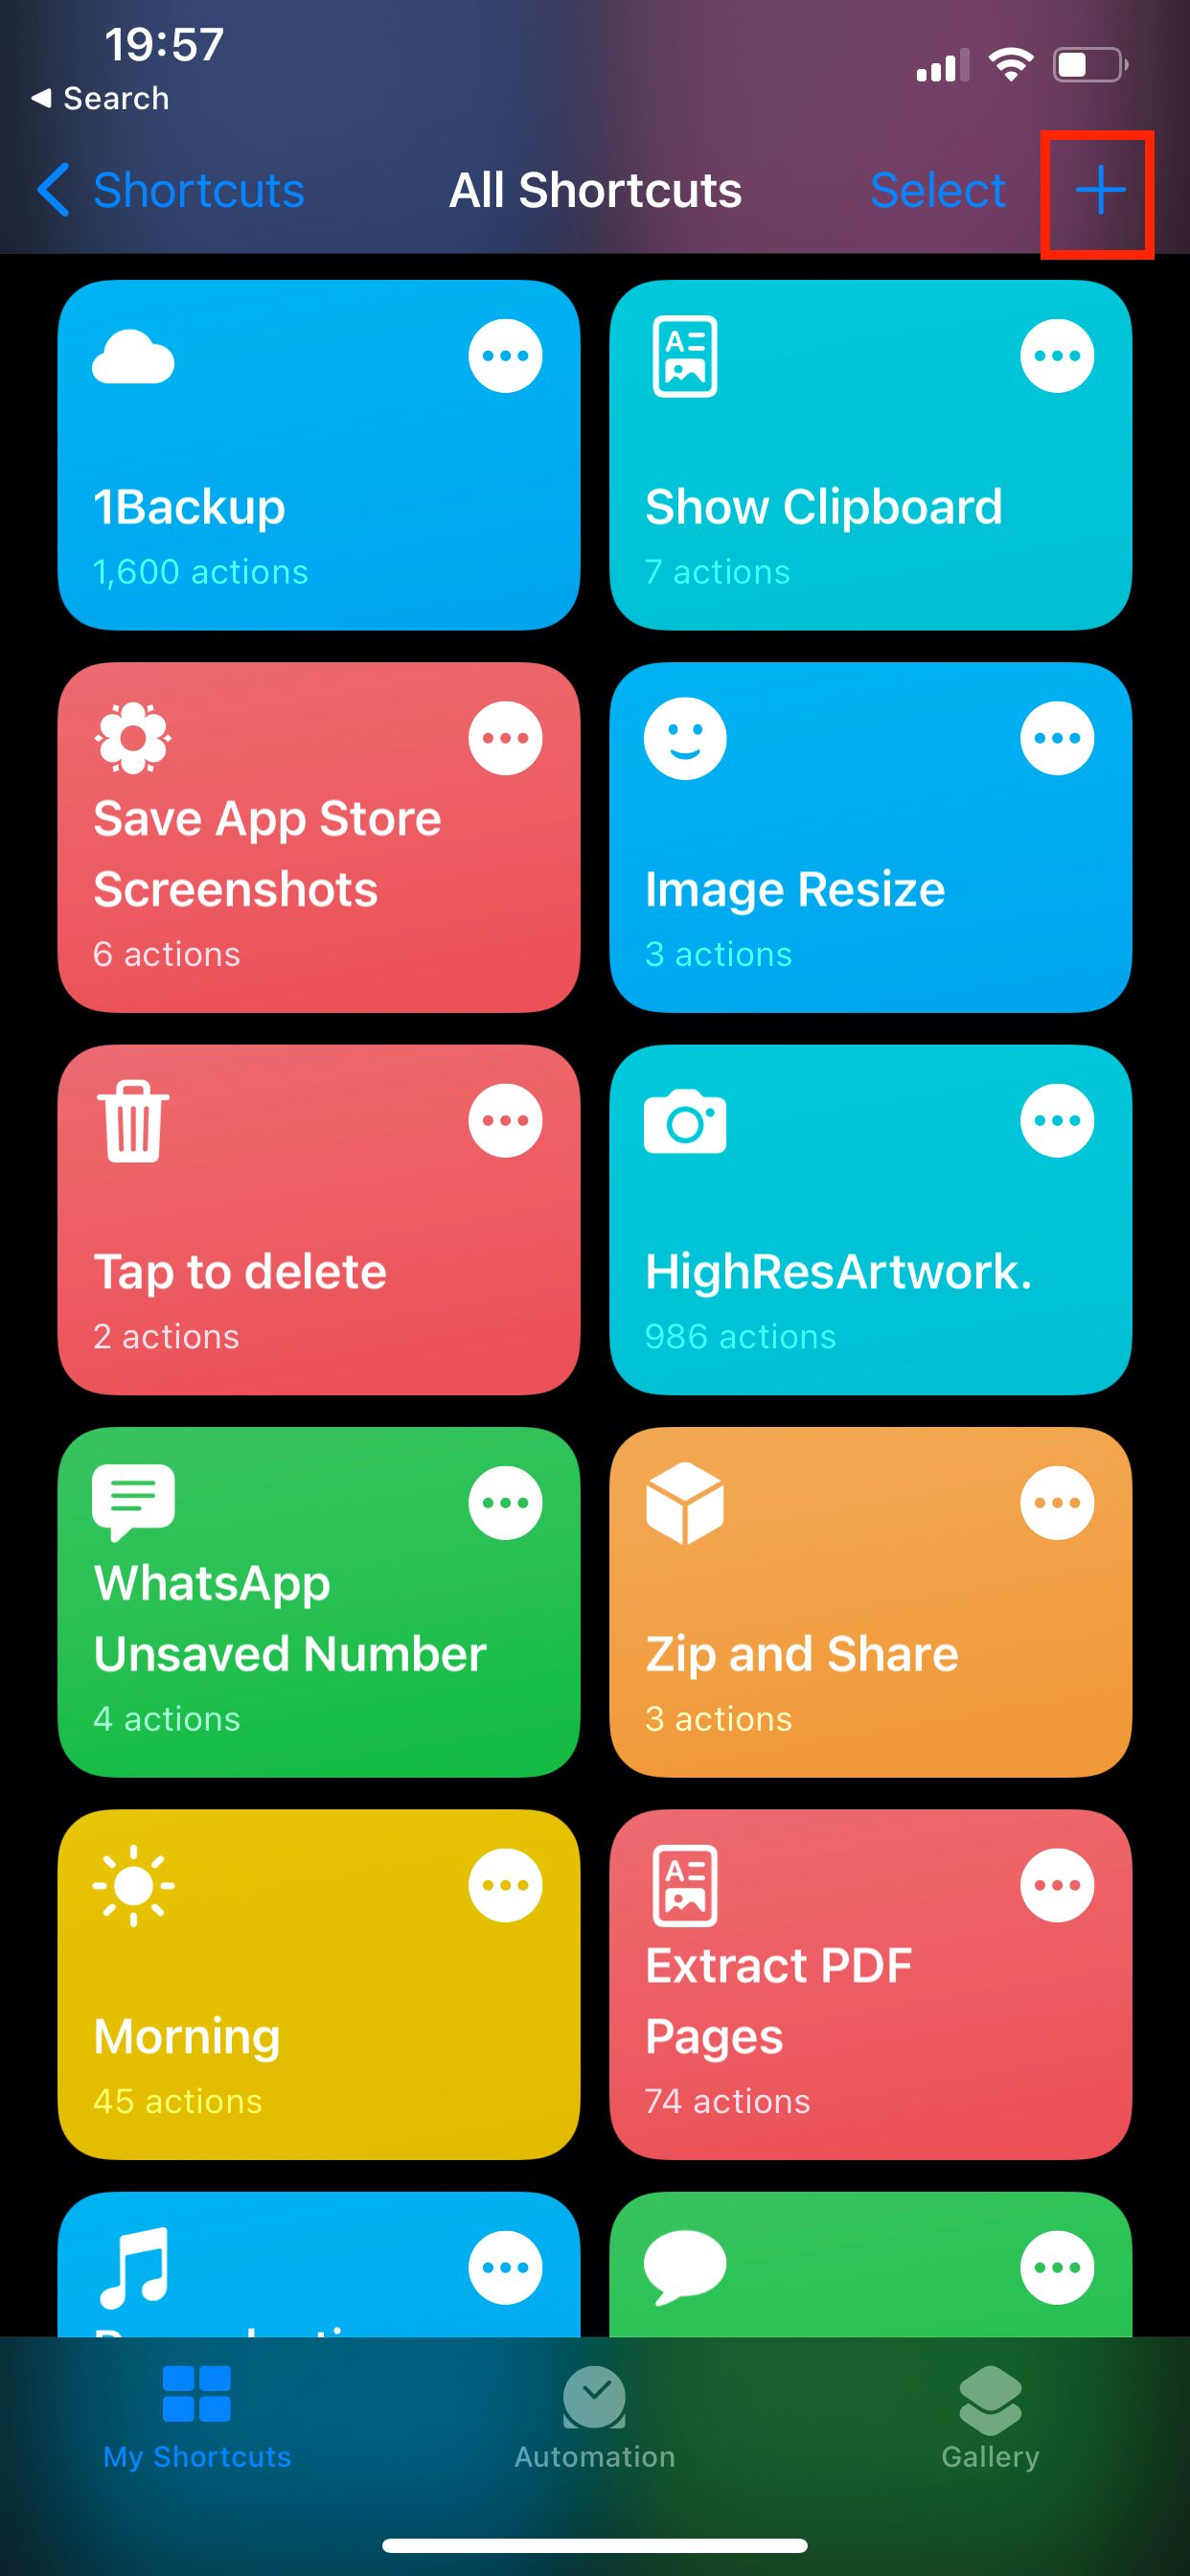 List of shortcuts in iPhone Shortcuts app